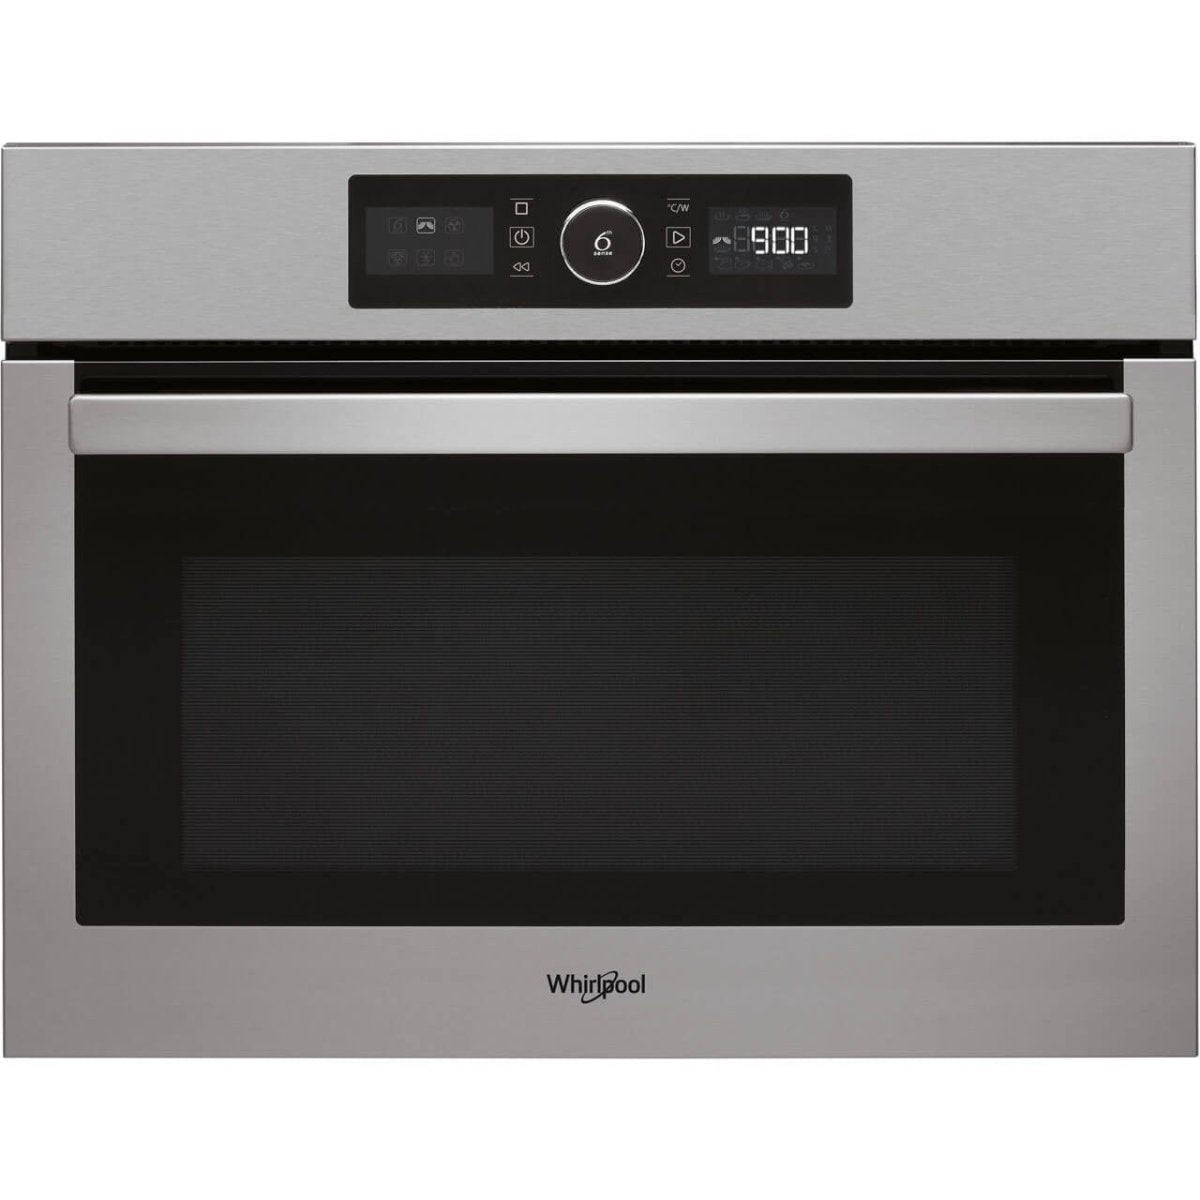 Whirlpool Absolute AMW9615IX Built In Combination Microwave Oven - Stainless Steel | Atlantic Electrics